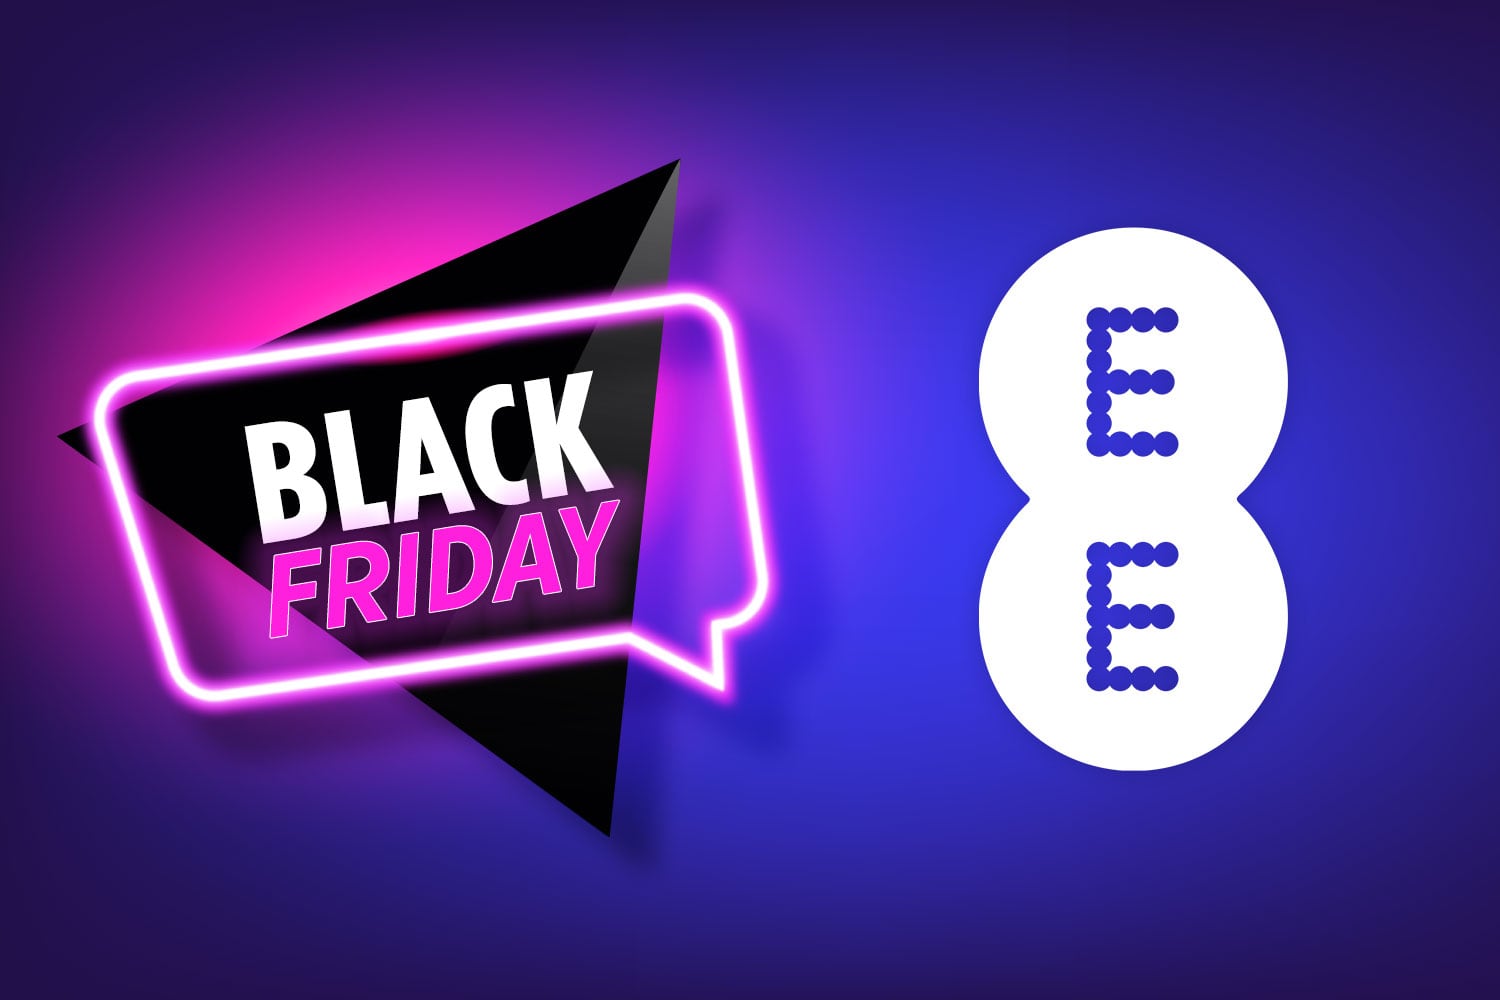 EE Black Friday 2022 deals - Will There Be Black Friday Deals For Skytrak 2022